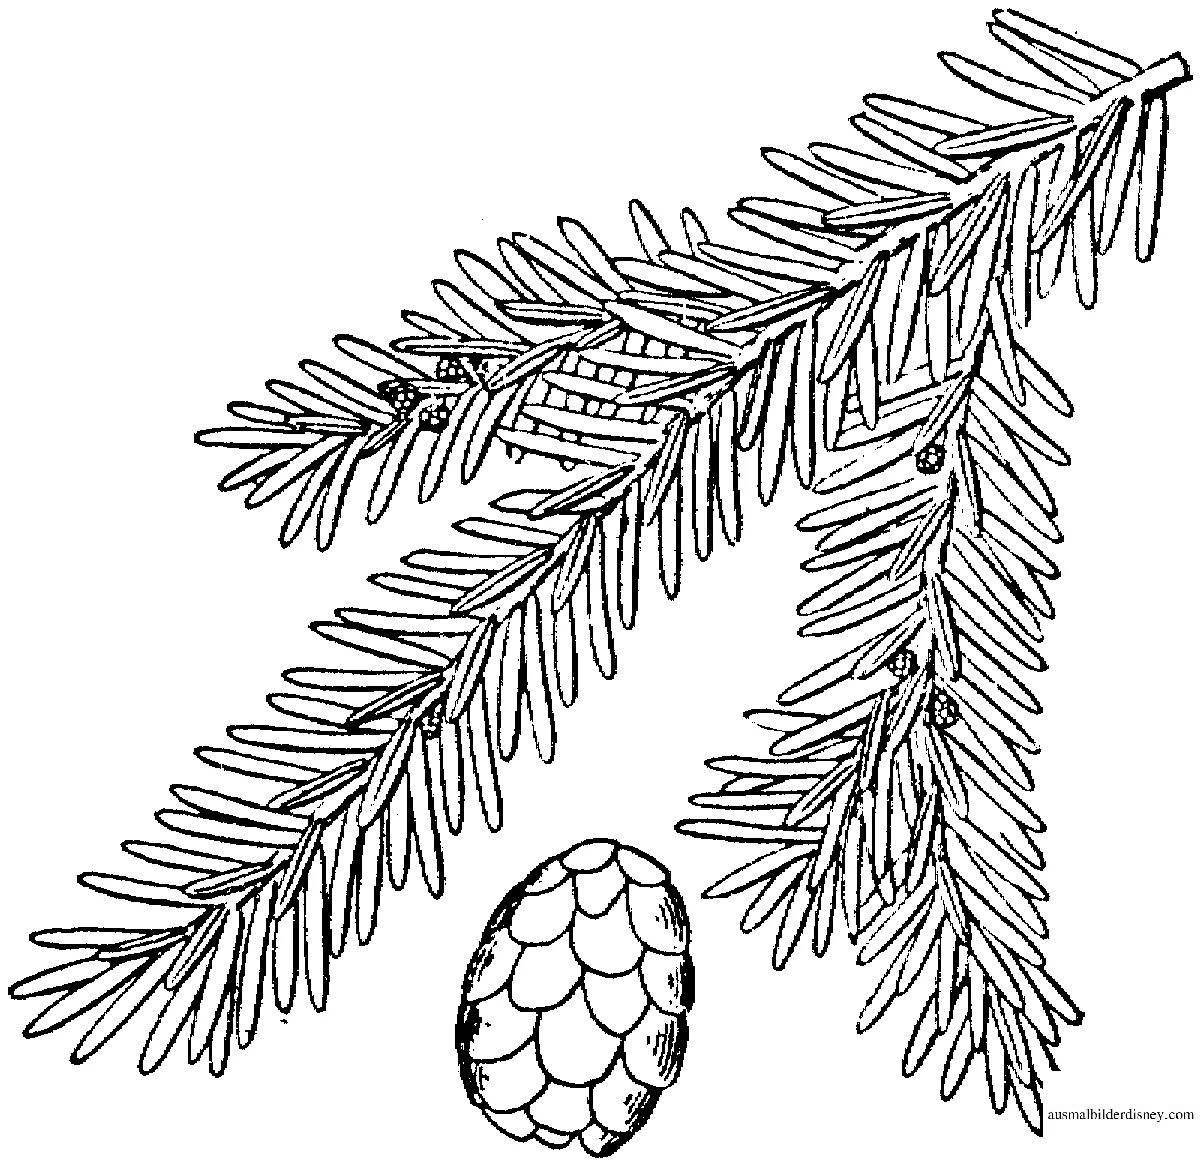 Shiny coloring book spruce branch with toys